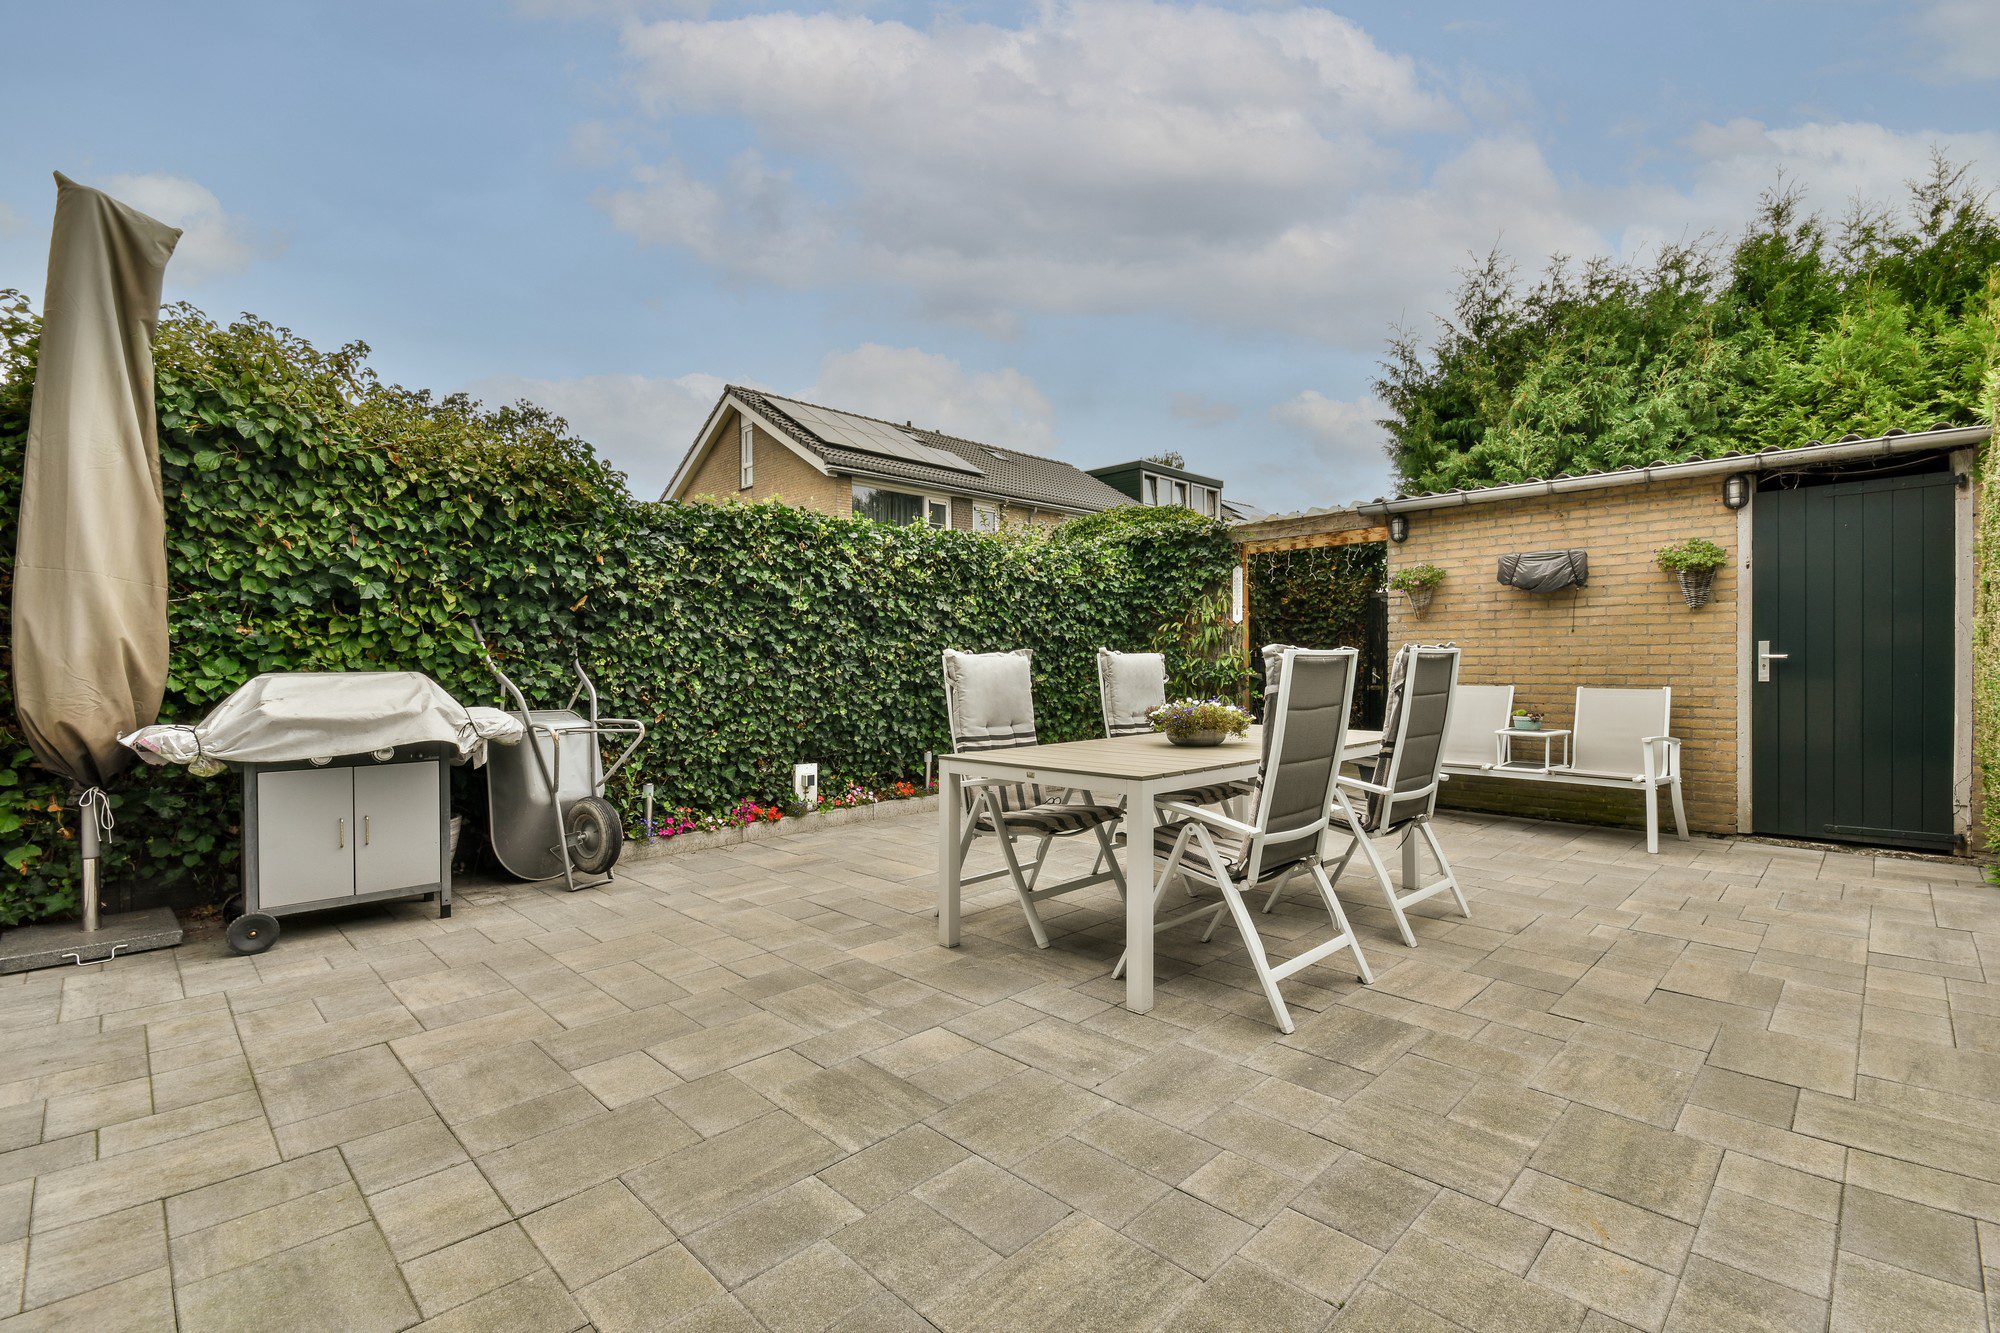 This image shows a neatly organized backyard or patio area. It features a large, paved surface with rectangular tiles. On the left side, there's a covered barbecue grill and a wheelbarrow against a hedge that borders the yard, giving a sense of privacy. There's an outdoor dining table set up in the centre with six chairs around it, all of which appear to be made of a light-coloured material that could be metal or plastic, with cushions on the seats for comfort. On the table is a small decorative plant. To the right, there's a brick wall with wall-mounted planters containing greenery and a green door, likely leading to a storage shed or another section of the property. The sky is a mix of clouds and blue, suggesting an overcast but pleasant day. Overall, the space looks well-maintained and inviting for outdoor dining or relaxation.